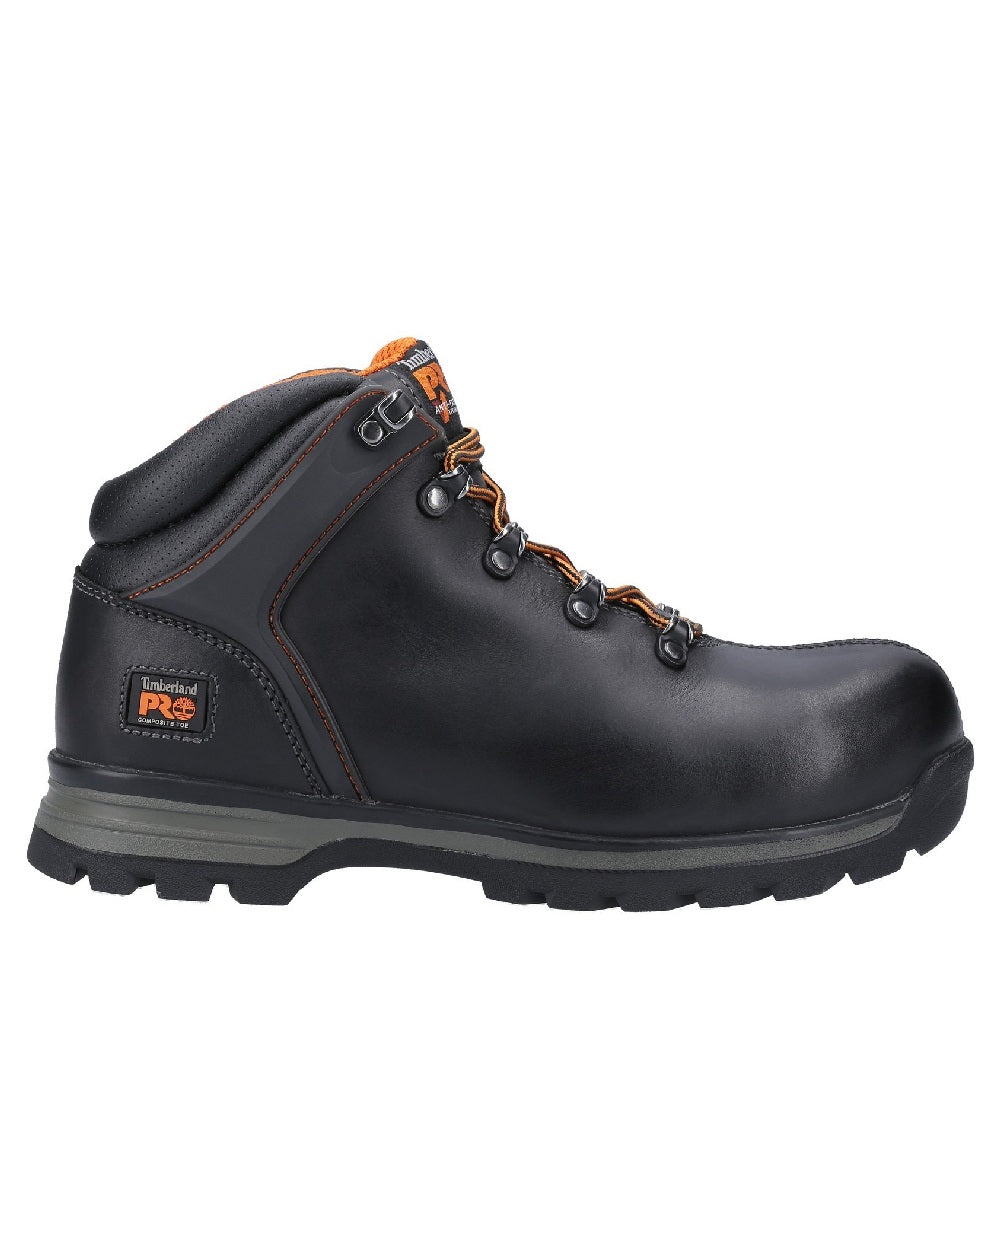 Black coloured Timberland Pro Splitrock XT Composite Safety Toe Work Boots on white background 